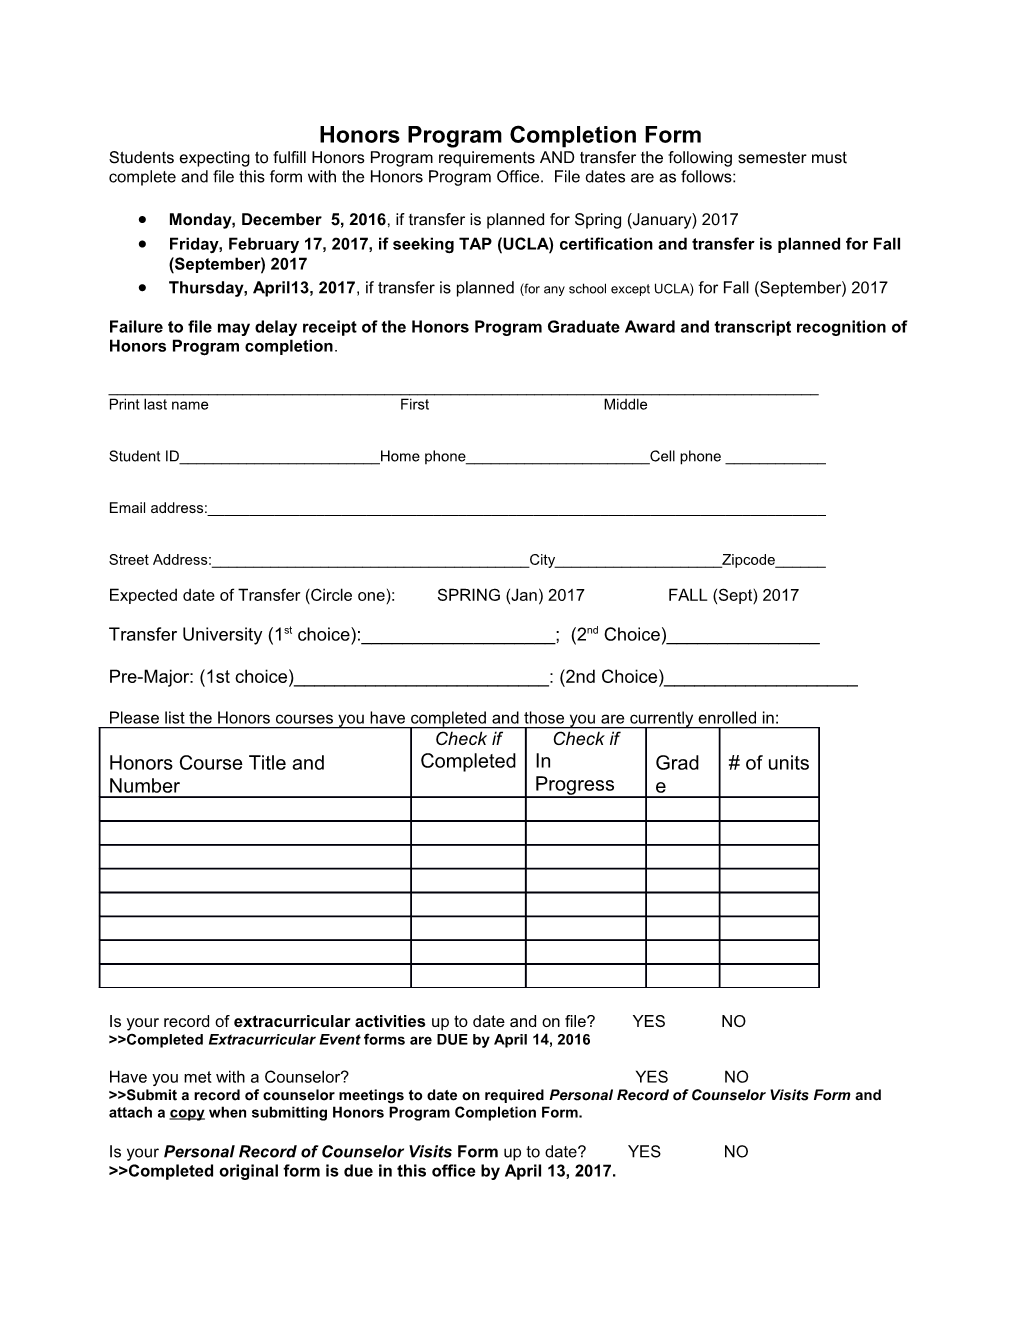 Honors Program Completion Form